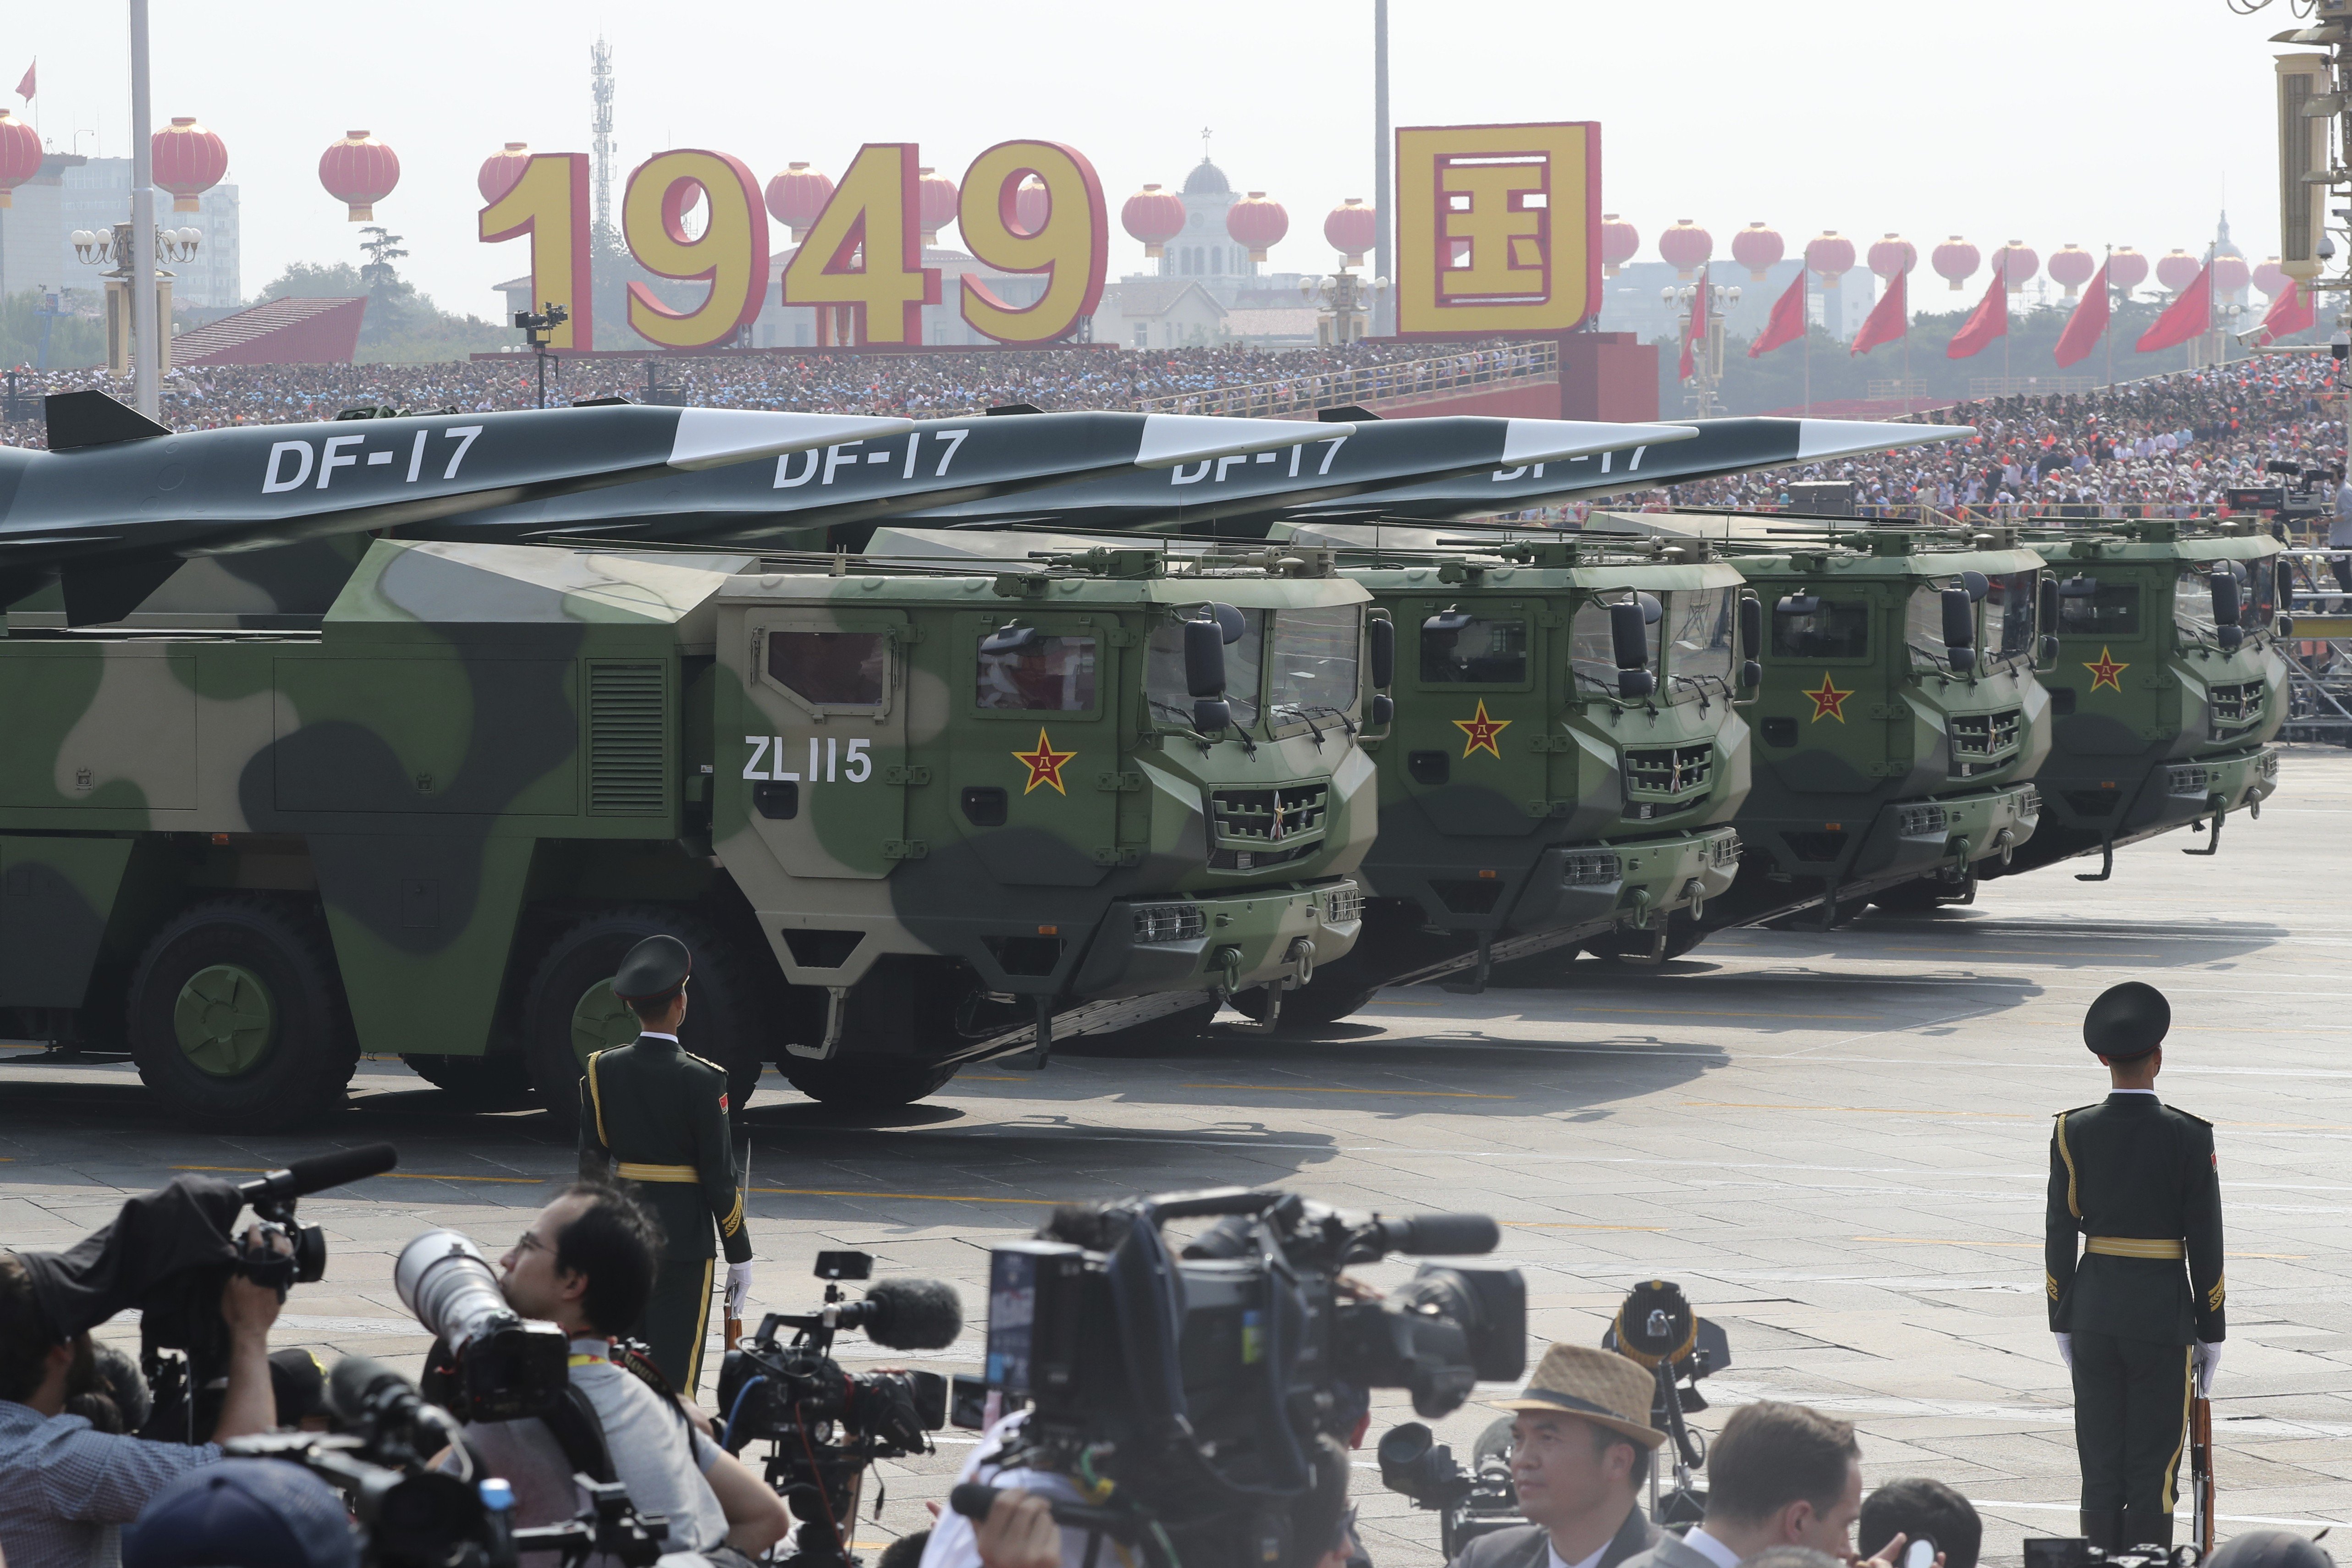 Military vehicles carry DF-17 missiles capable of reaching the US mainland during the parade to mark 70 years of the People’s Republic. Photo: AP